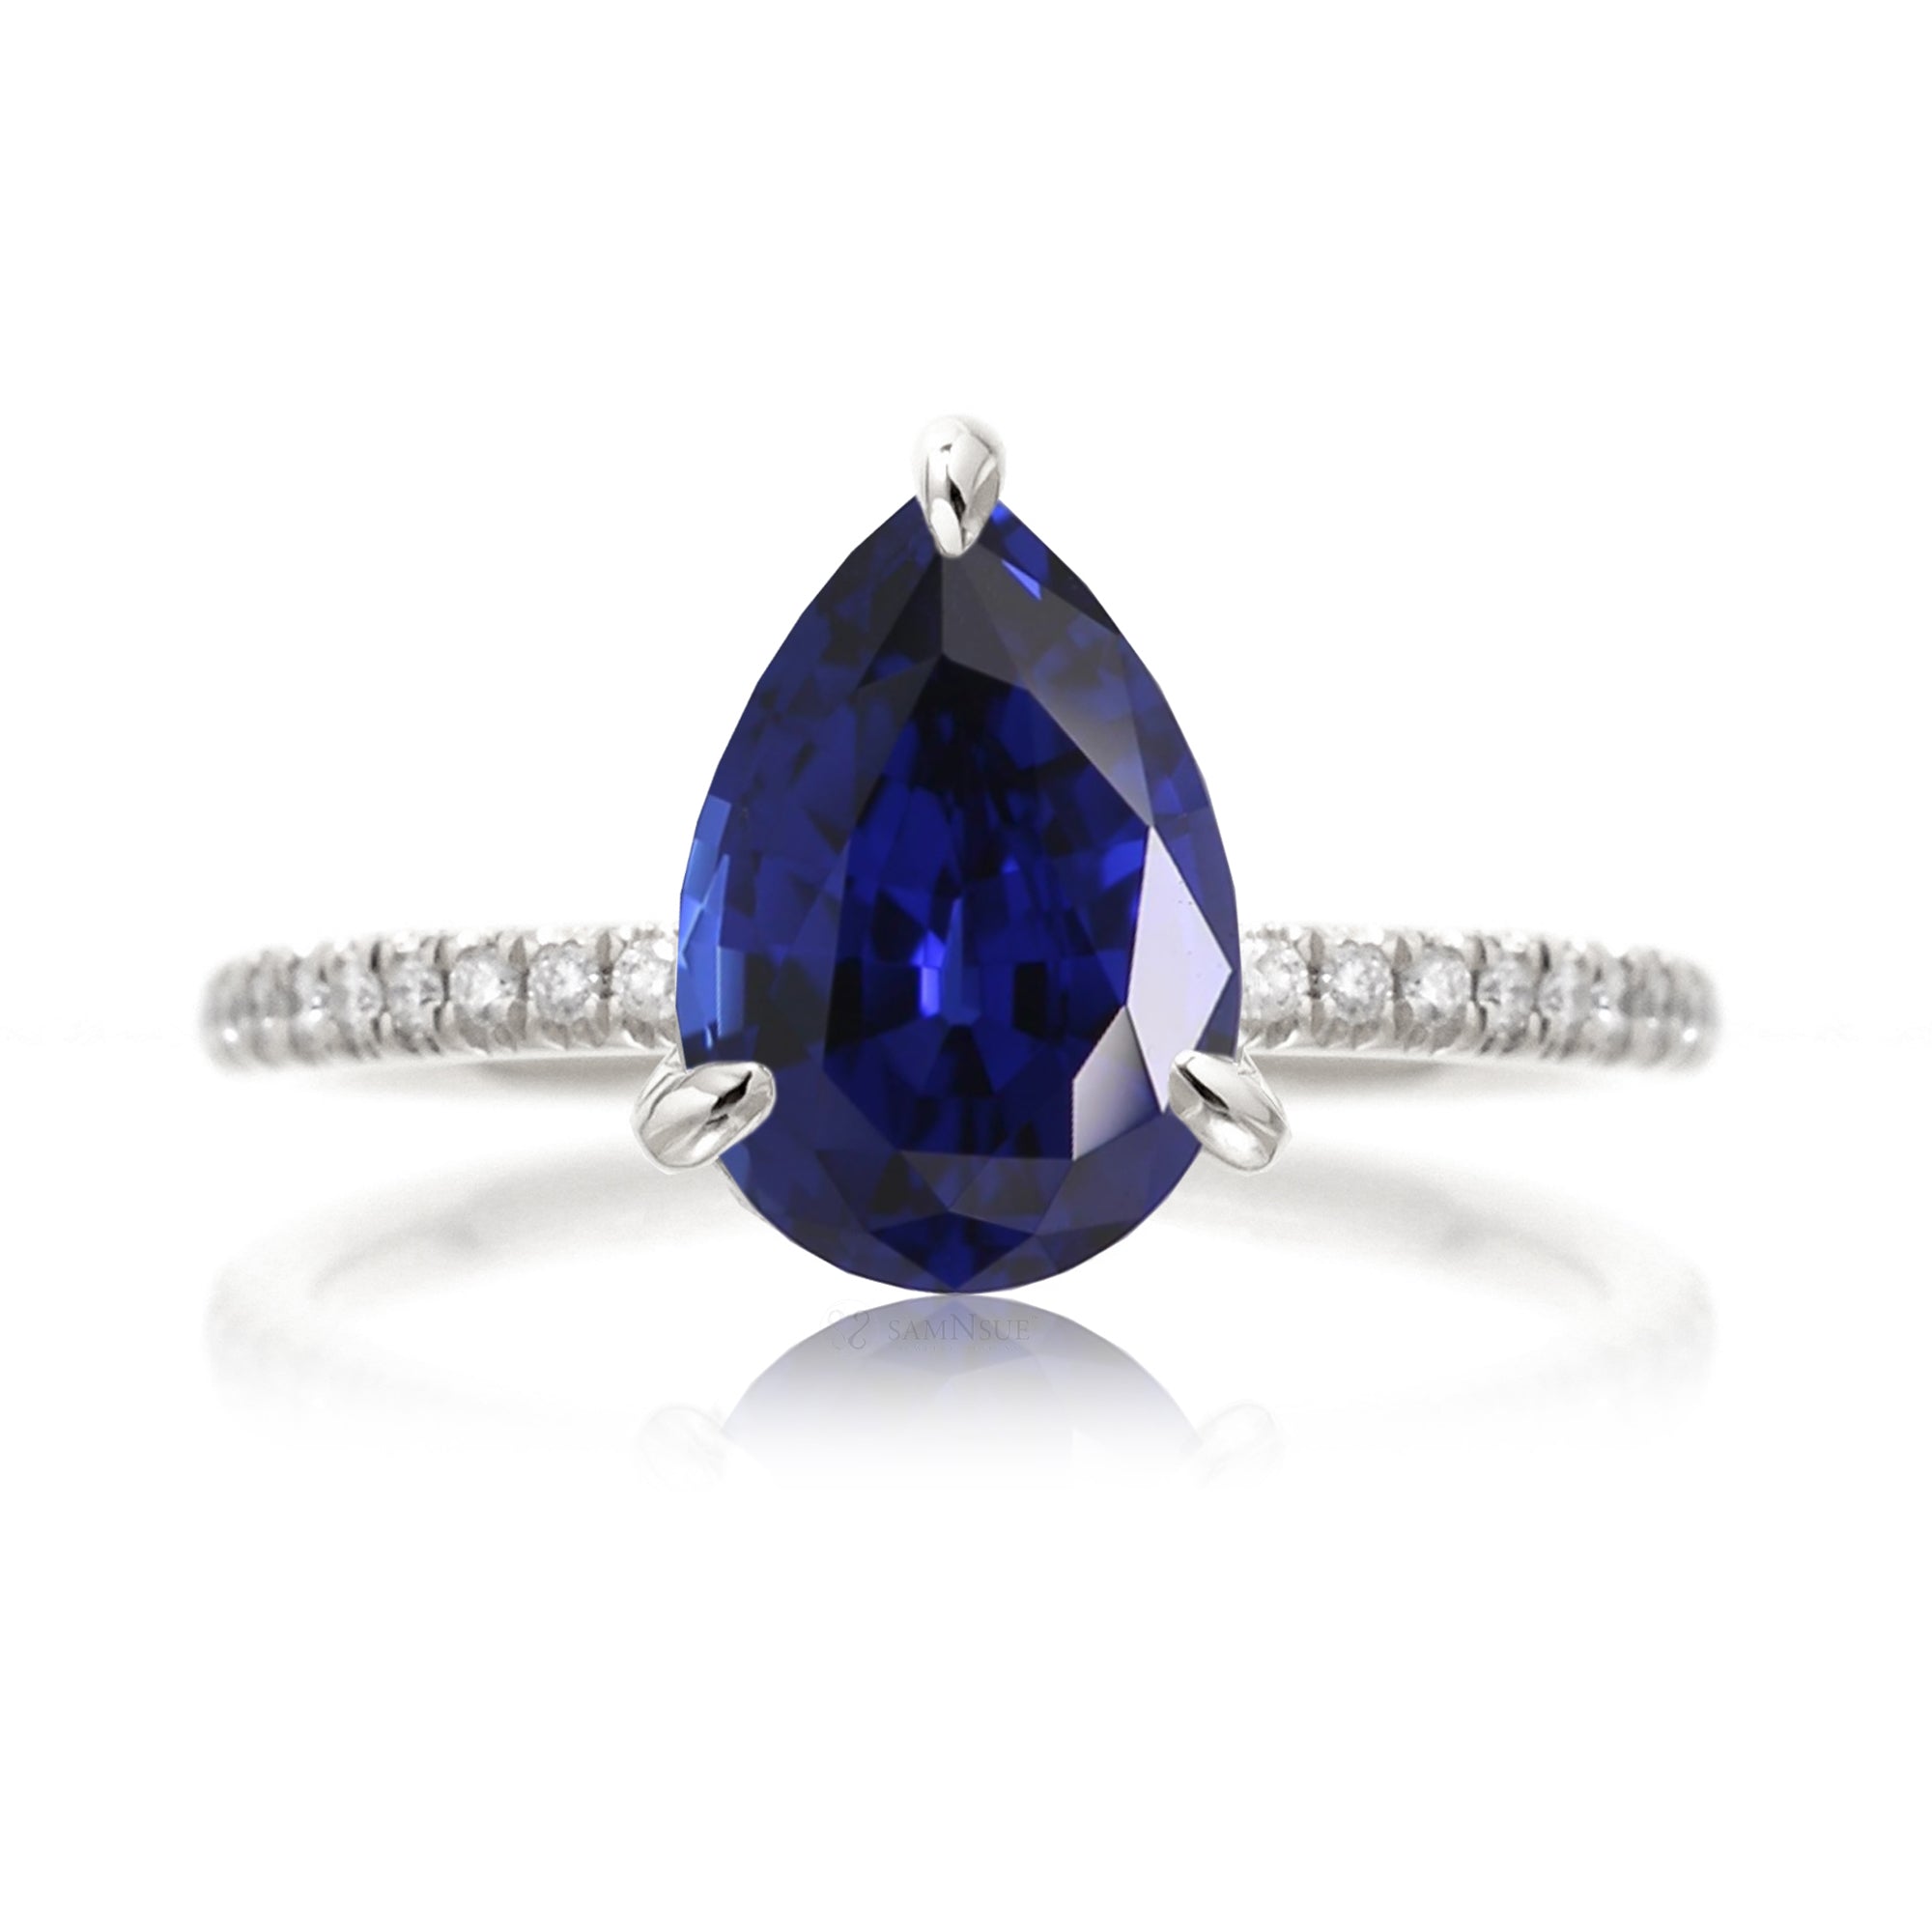 Pear cut blue sapphire diamond band engagement ring white gold - the Ava